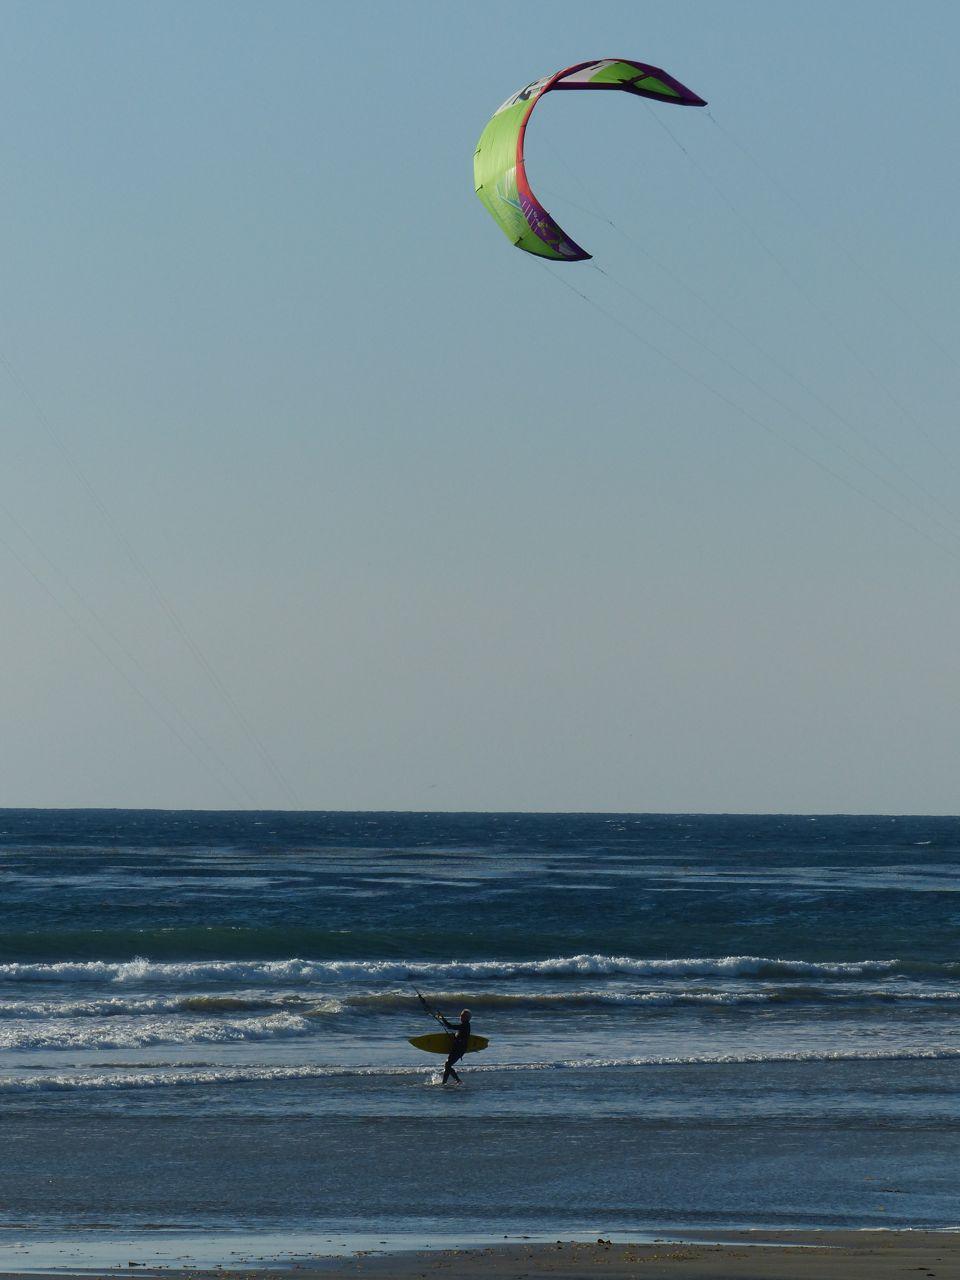 Cardiff-by-the-Sea Kiteboarding